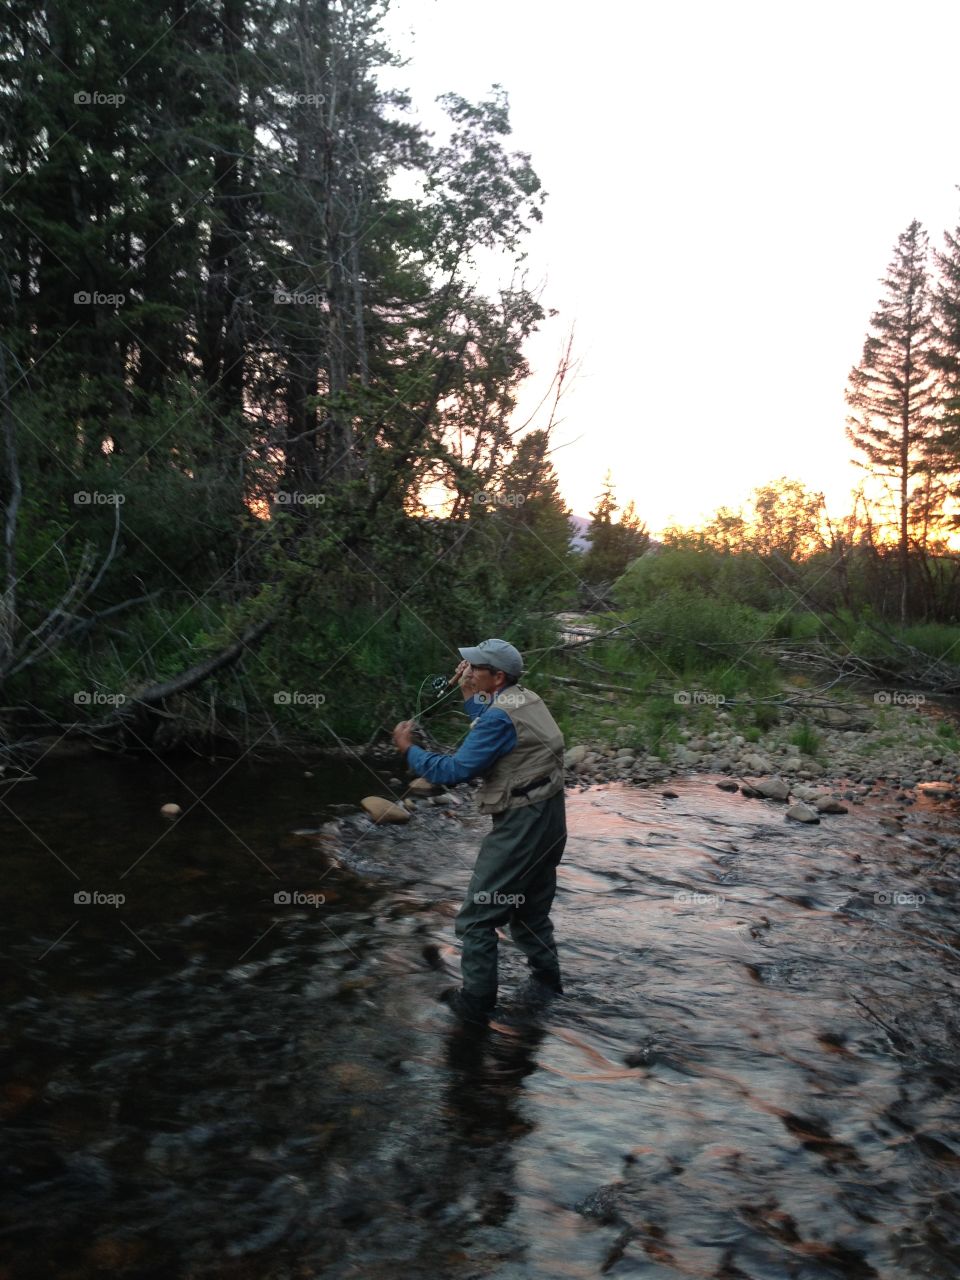 Casting a fly rod in a mountain stream